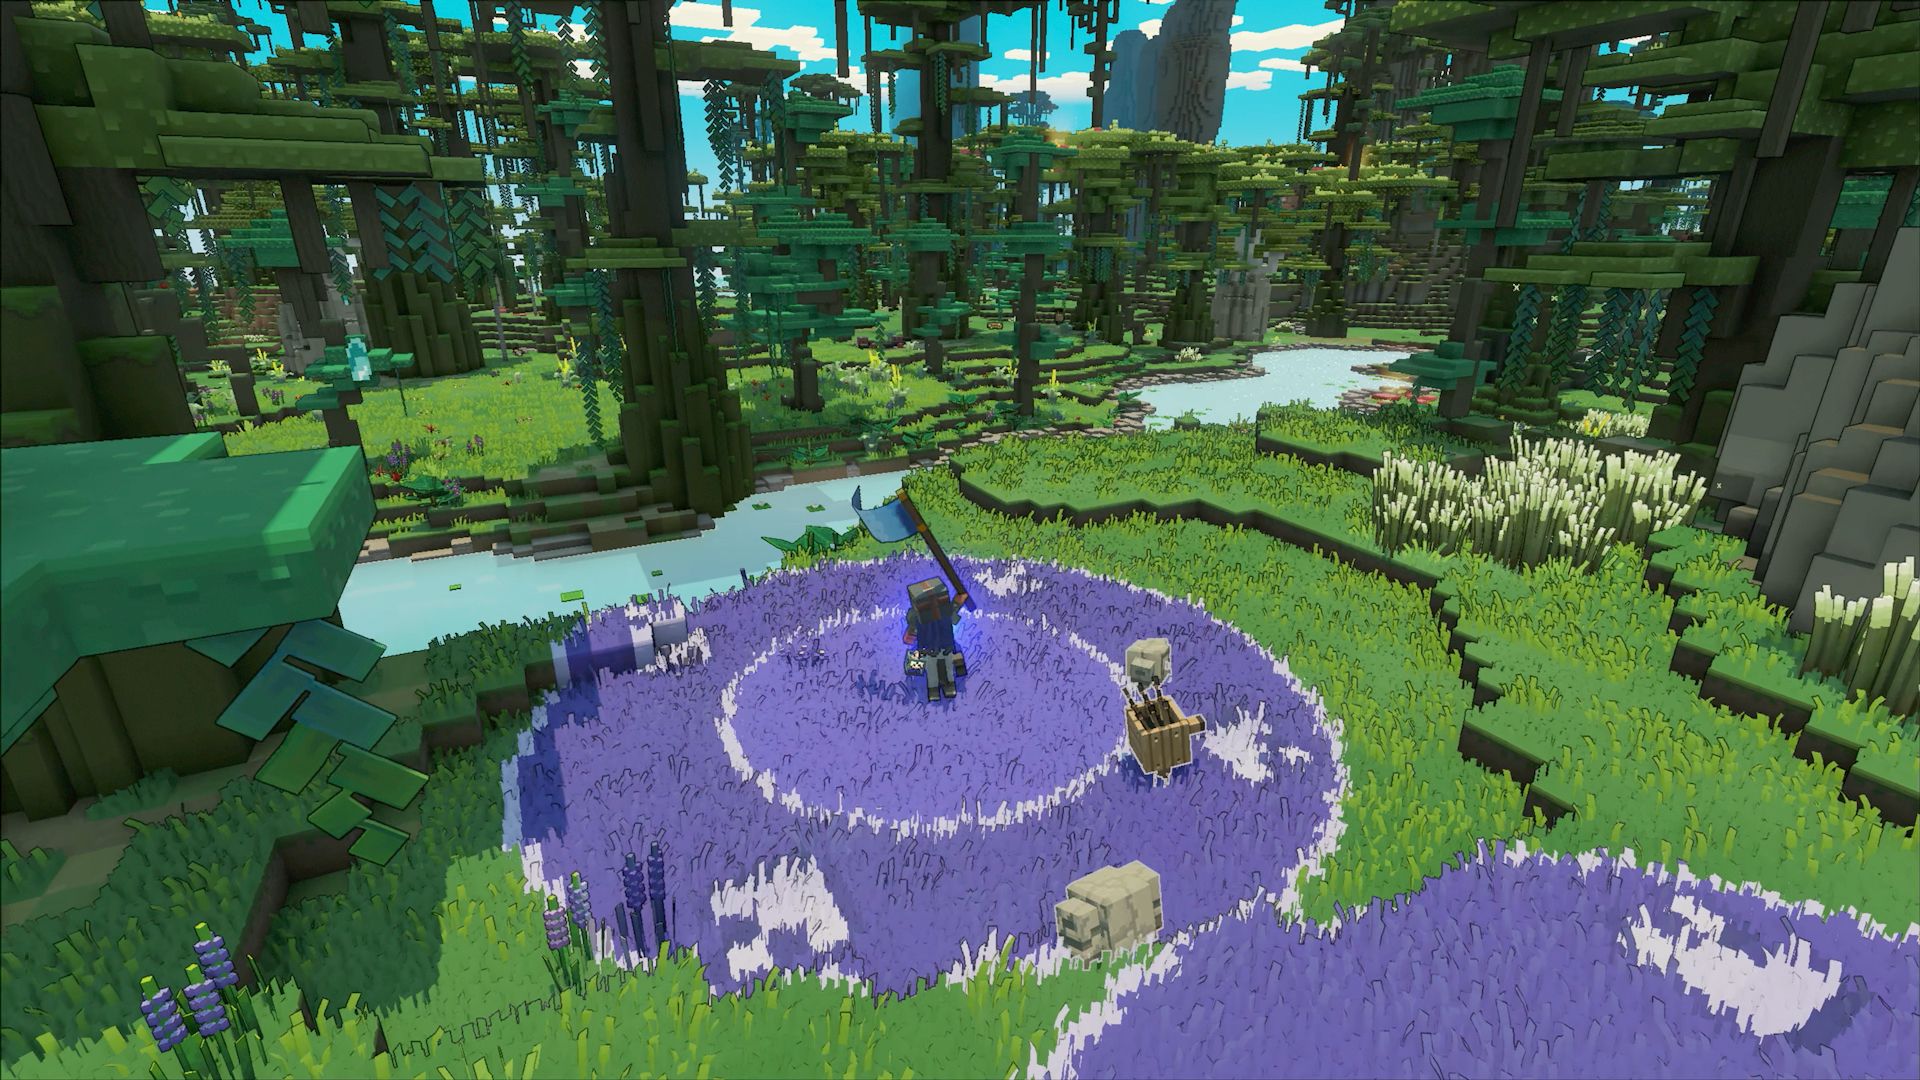 Video game screenshot of blocky warriors in a forest